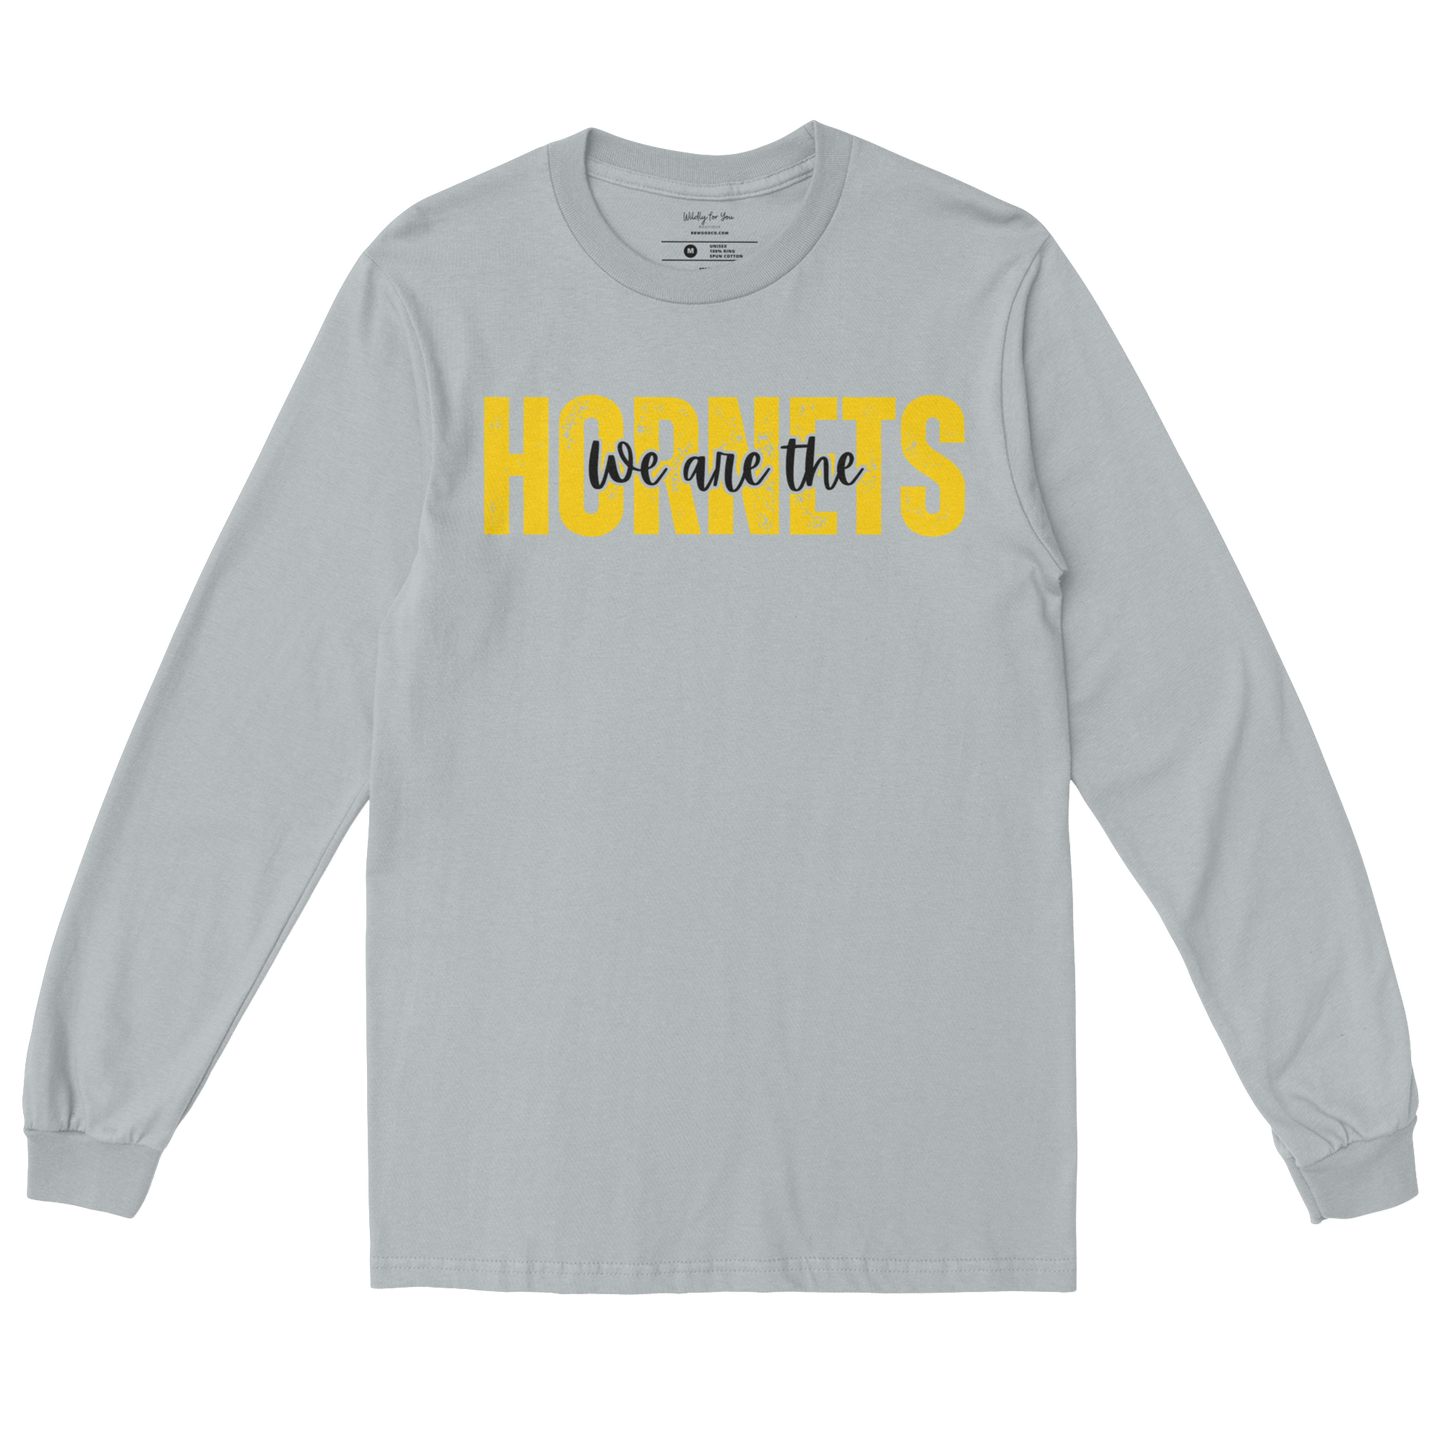 We are the Hornets Youth Long Sleeve Tee